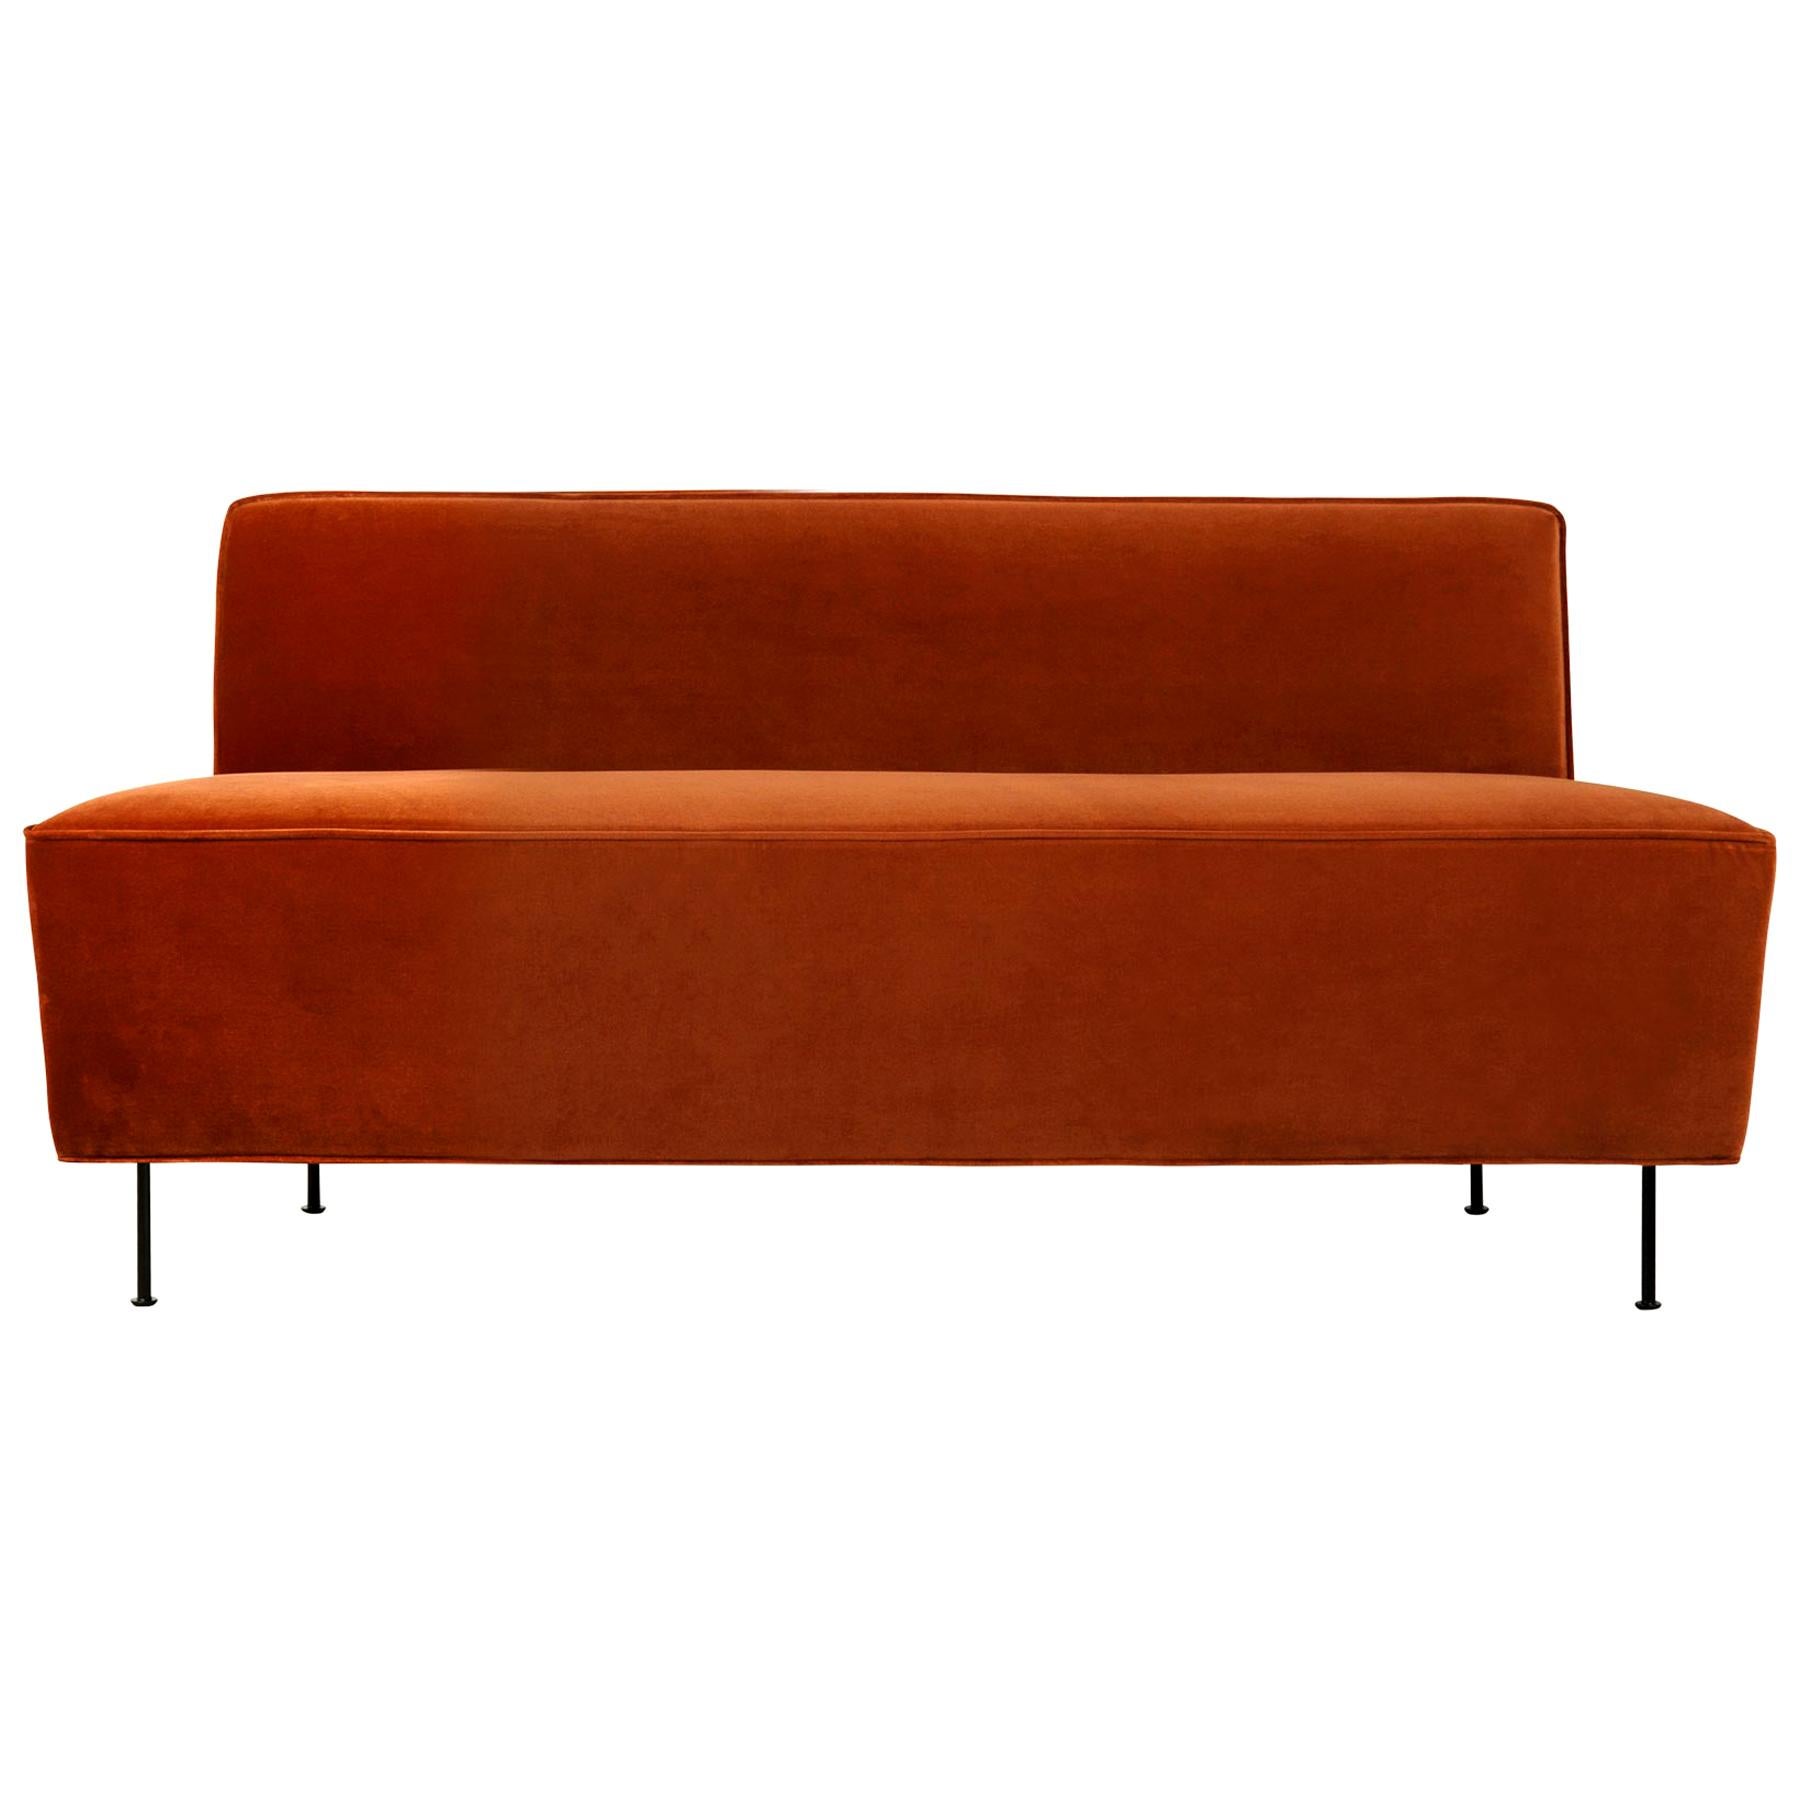 Modern Line Sofa, Dining Height, Small with Brass Legs For Sale